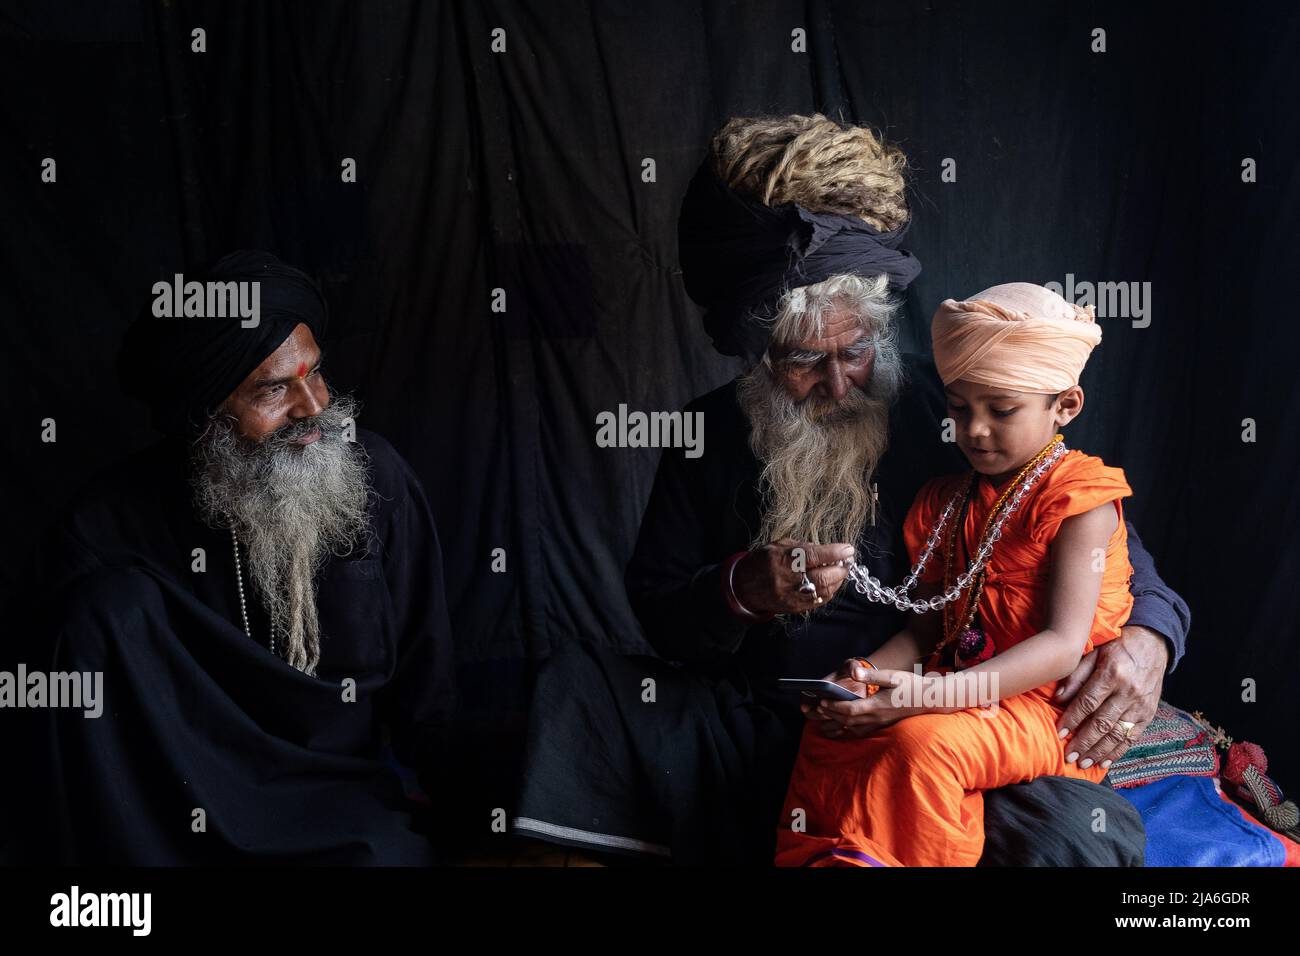 Two holy men take care of a child sadhu in their tent at the Kumbh Mela festival. Every twelve years, millions of Hindu devotees begin a massive pilgrimage to the most sacred of Indian festivals: the Kumbha Mela, which takes place in Prayagraj, a place considered particularly auspicious because it is at the confluence of the Ganges, Yamuna and the mythical Saraswati. It is estimated that in 2019, 120 million people attended the sacred enclosure over the course of a month and a half. These numbers, equivalent to the total population of Japan, and 40 times the number of pilgrims who visit Mecca Stock Photo